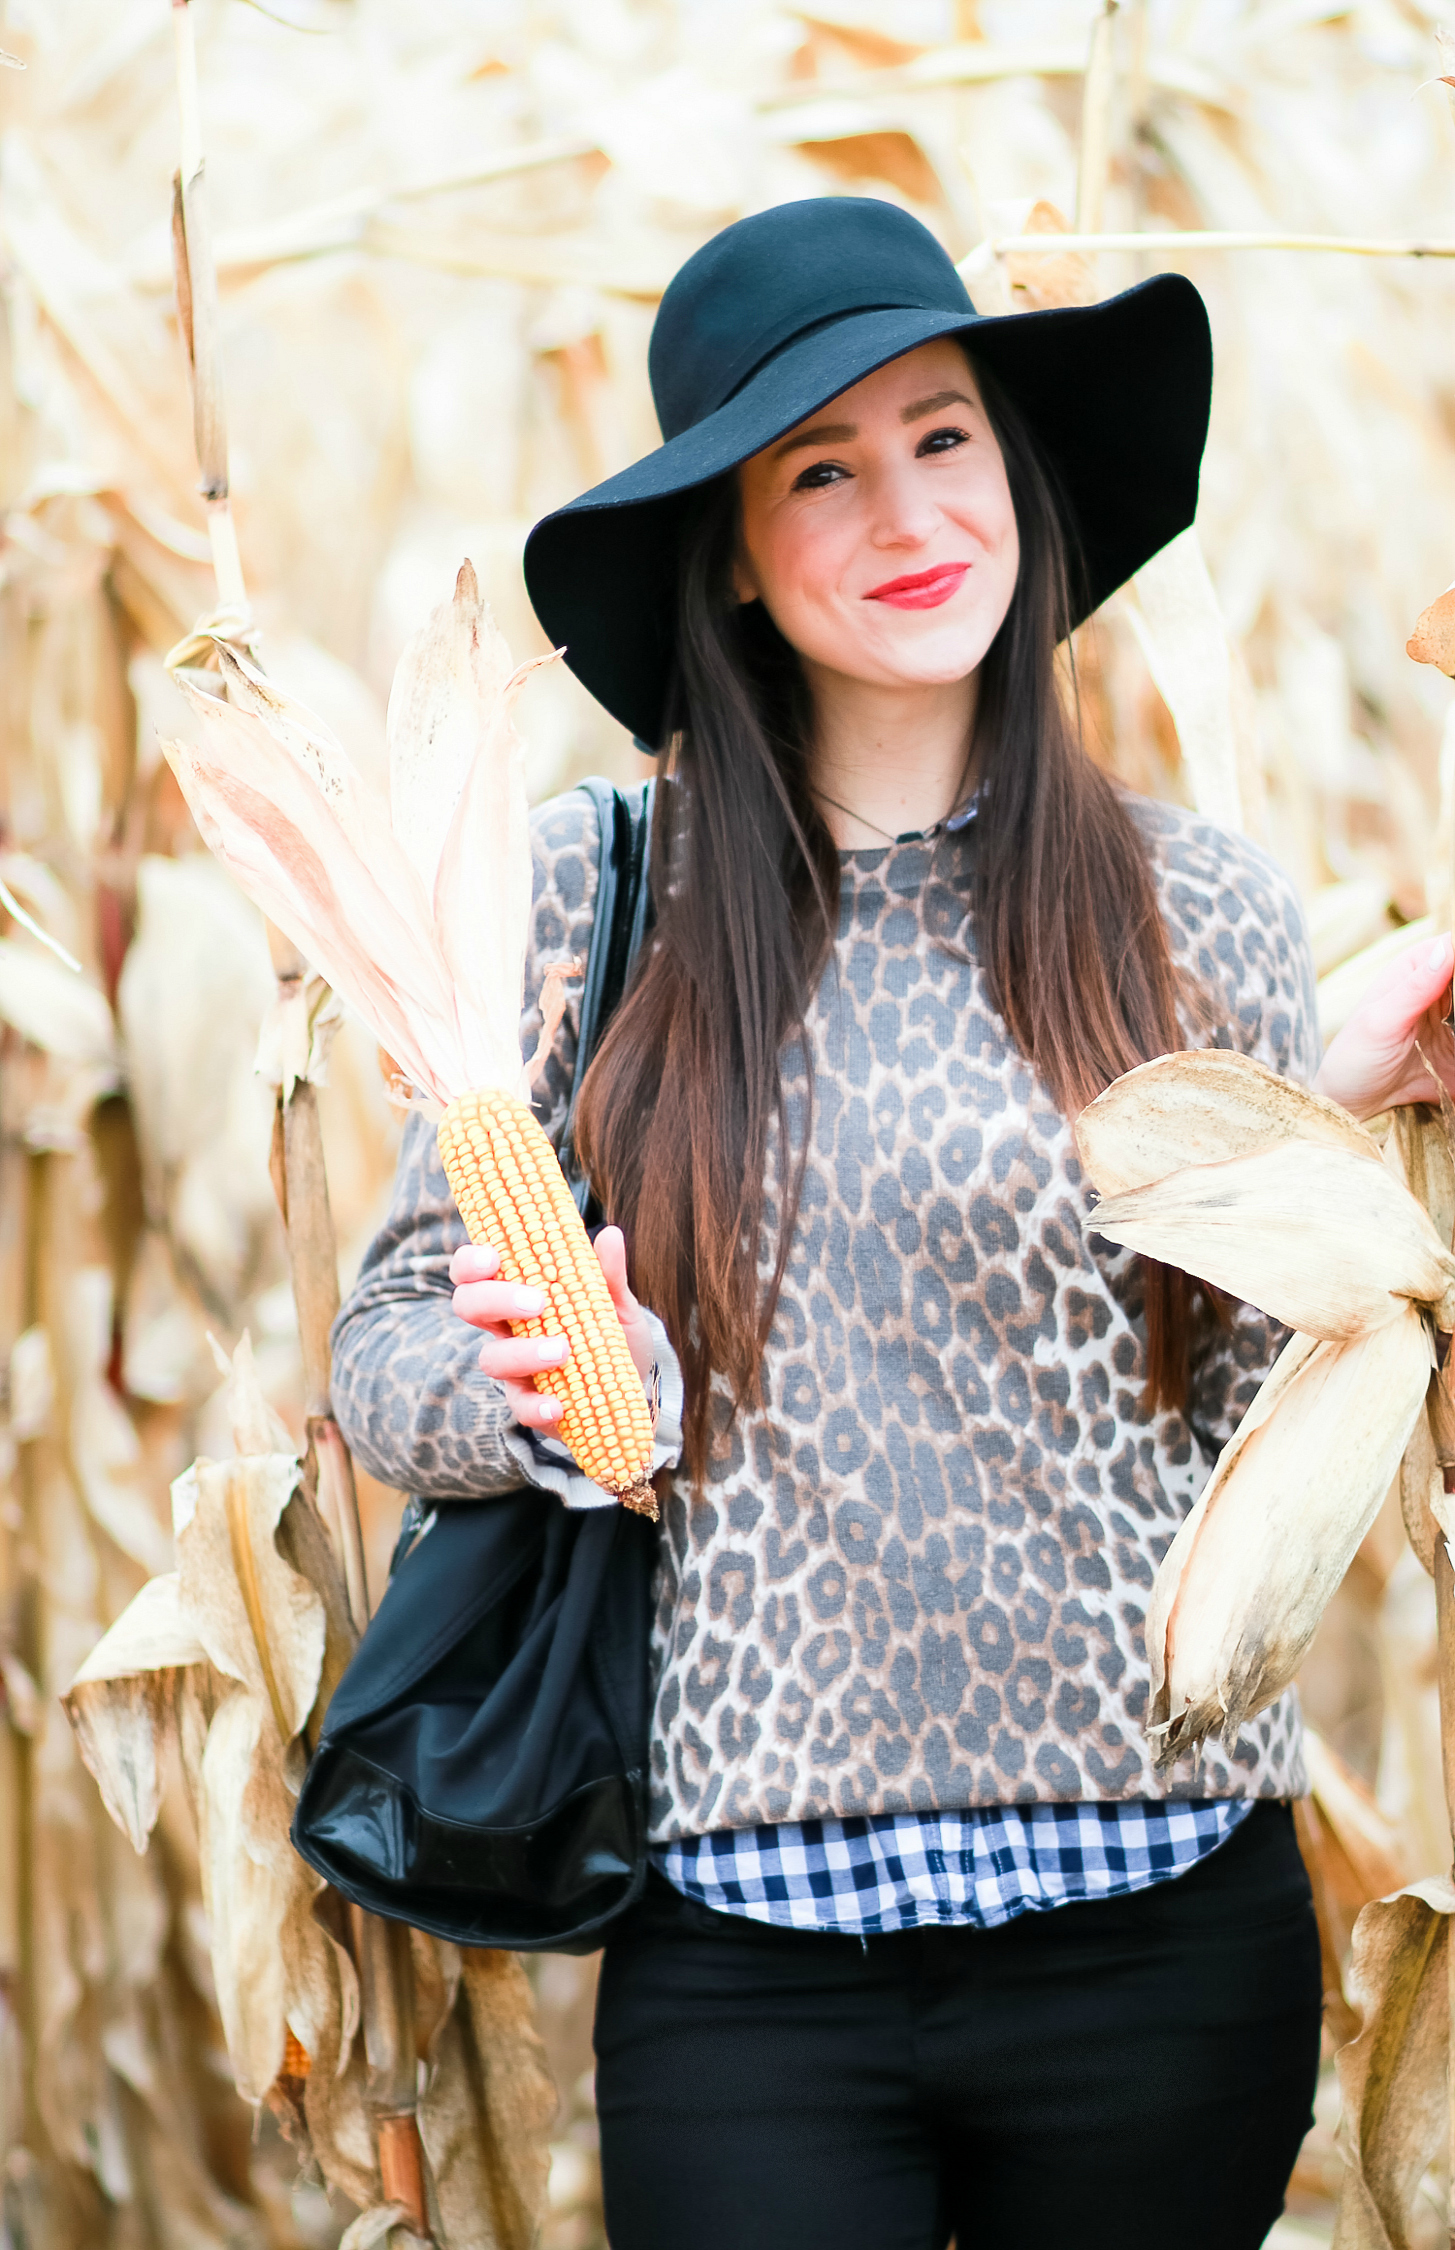 Black floppy hat with leopard crewneck sweater, J.Crew Factory blue gingham button down, black jeans, Nine West tall black boots, and a Tory Burch Ella tote | Comfy and casual fall outfit idea | How to wear a floppy hat in the fall by fashion blogger Stephanie Ziajka from Diary of a Debutante